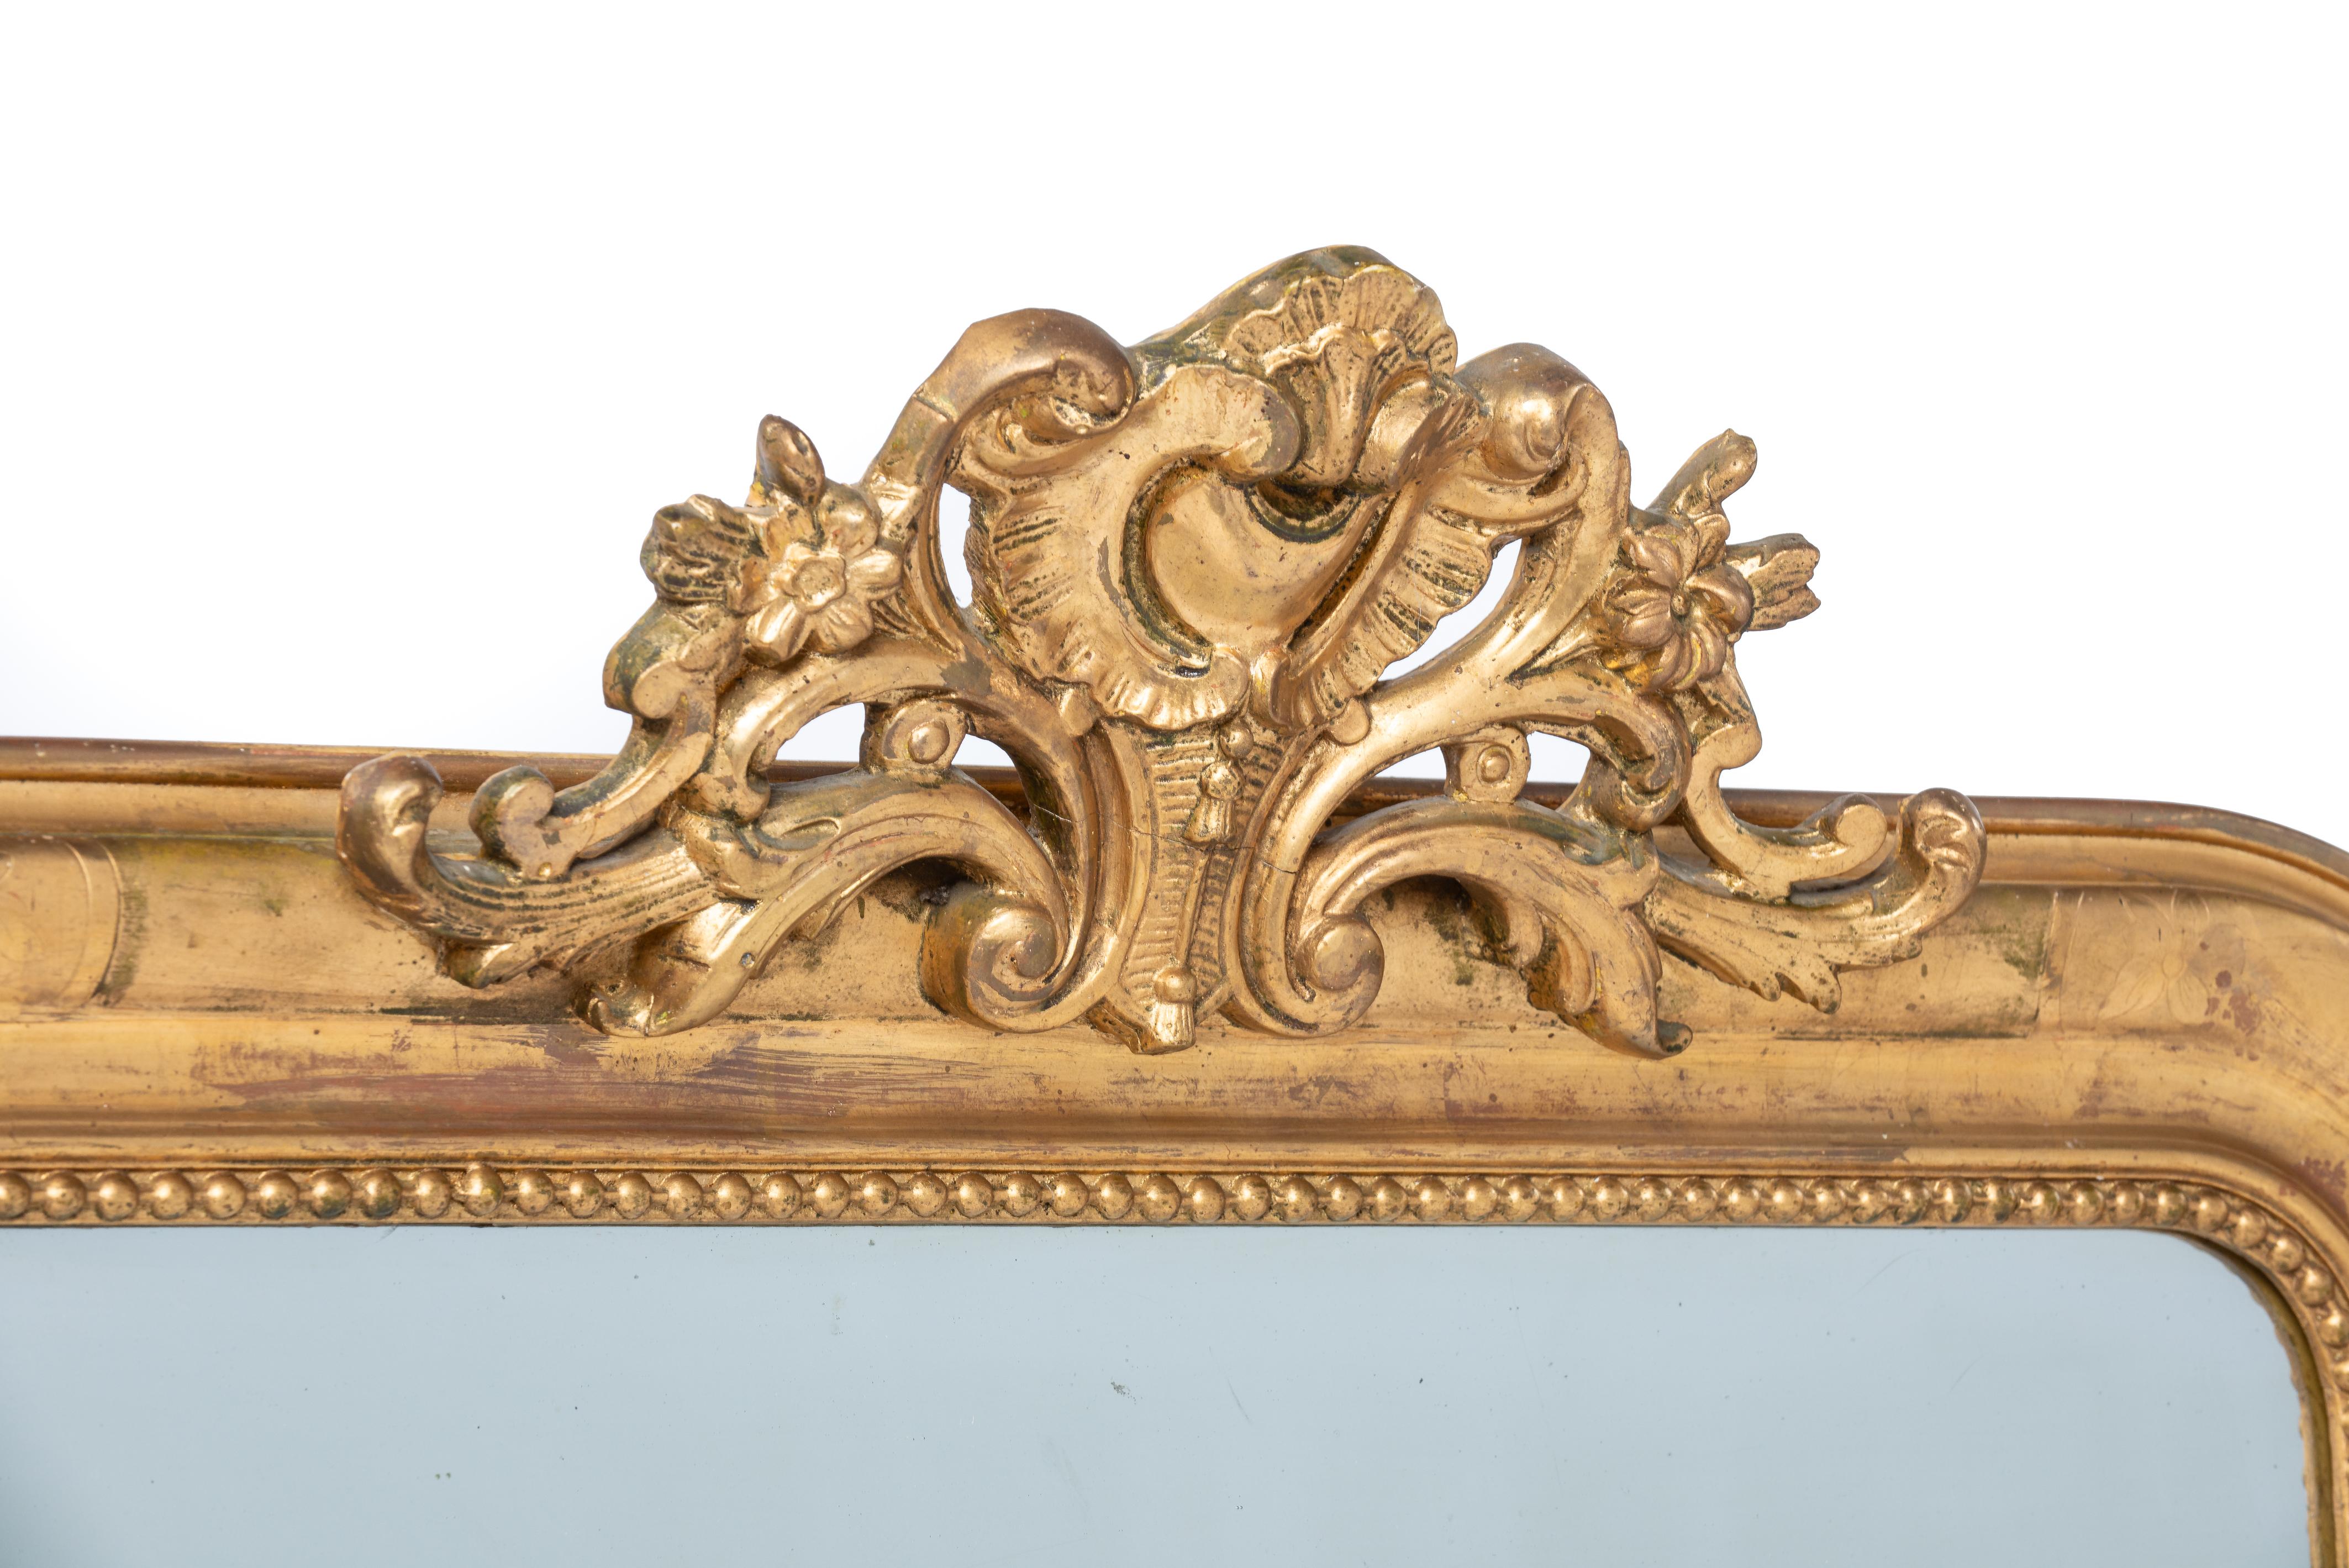 This is a wonderful completely gold leaf gilt mirror that was made in central France in the late 19th century, circa 1875. It features the upper rounded corners typical for the Louis Philippe style. The mirror was decorated with an ornate crest